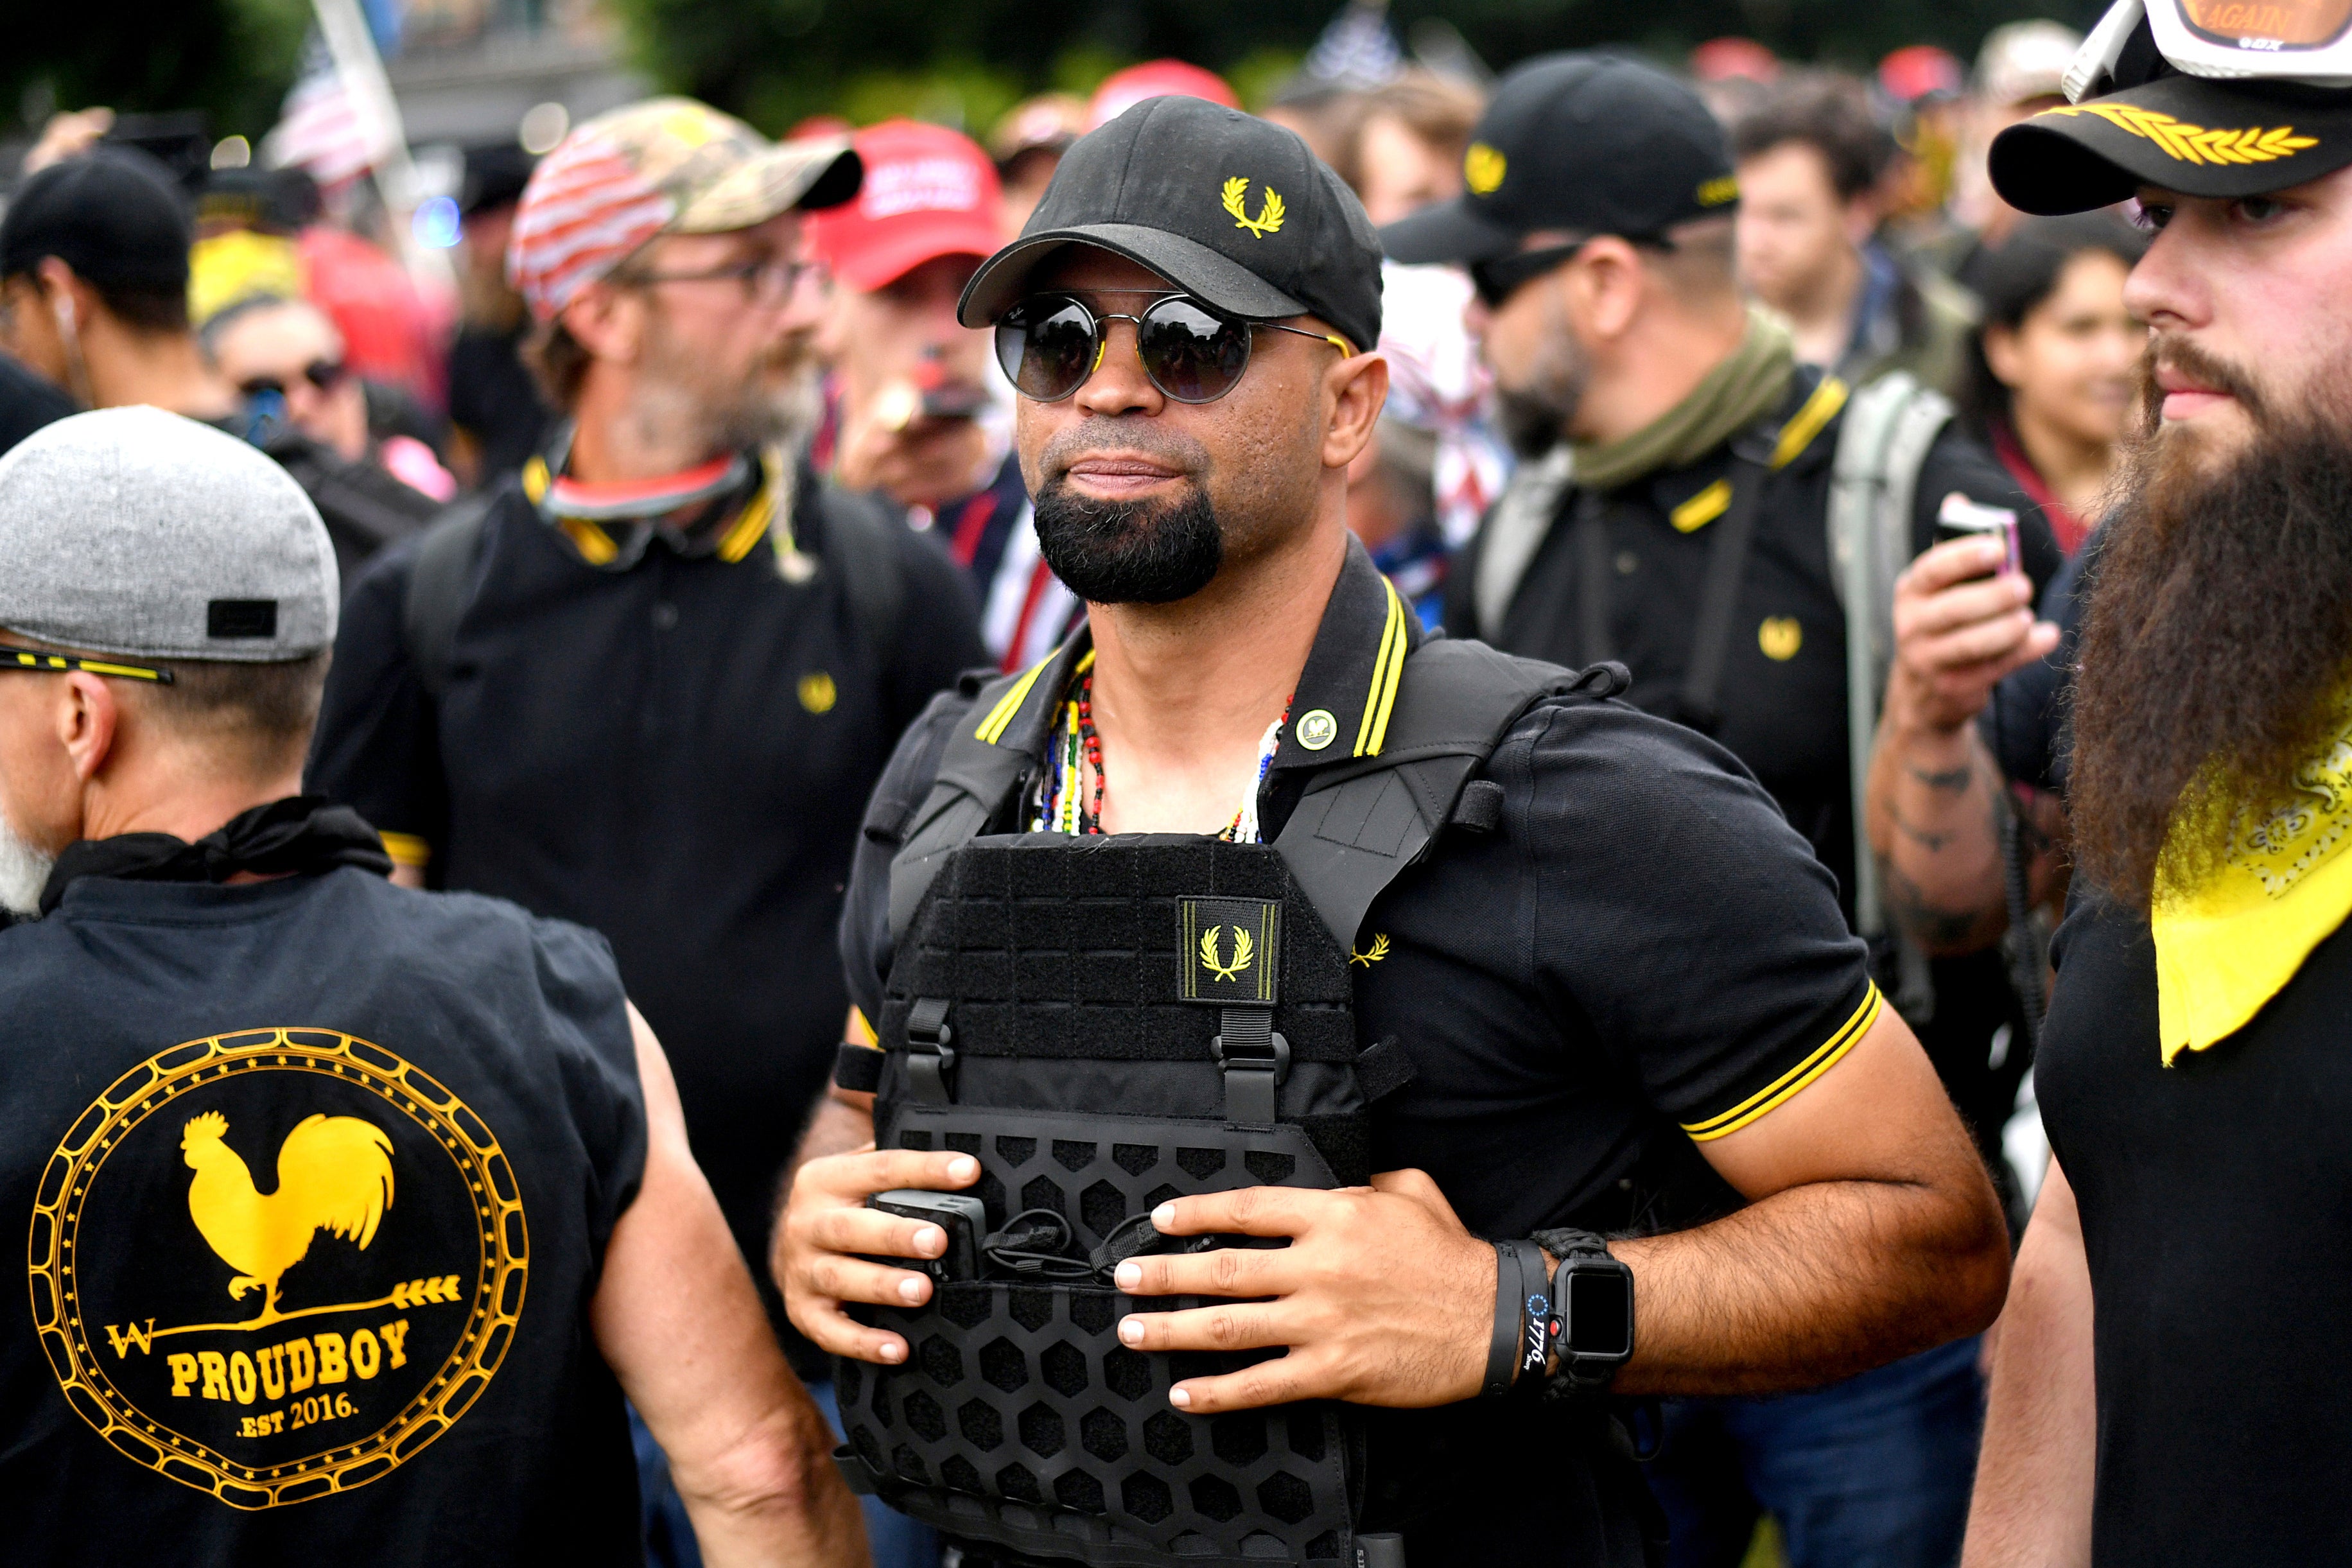 Former Proud Boys chairman Enrique Tarrio at a rally in Portland, Oregon, in August 2019